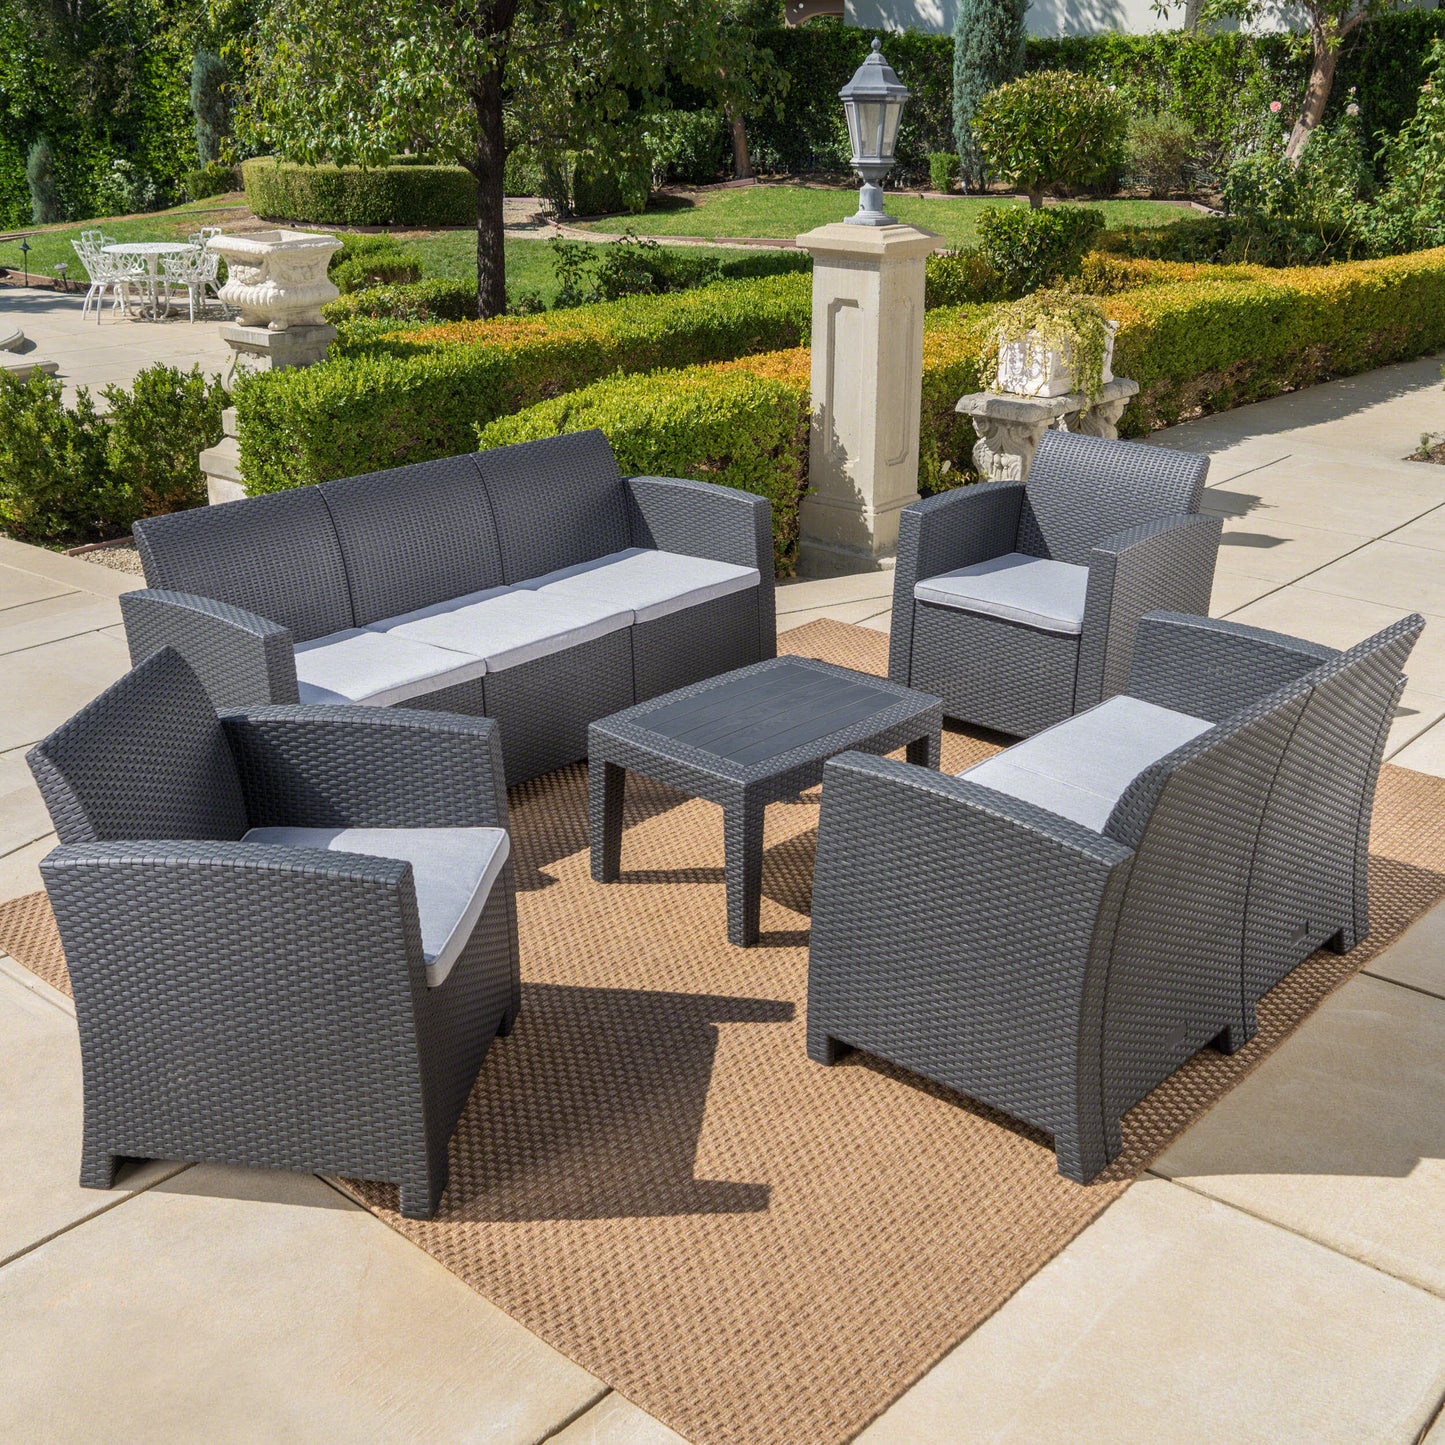 Dayton Outdoor 5 Piece Faux Wicker Rattan Chat Set with Sofa and Water Resistant Cushions